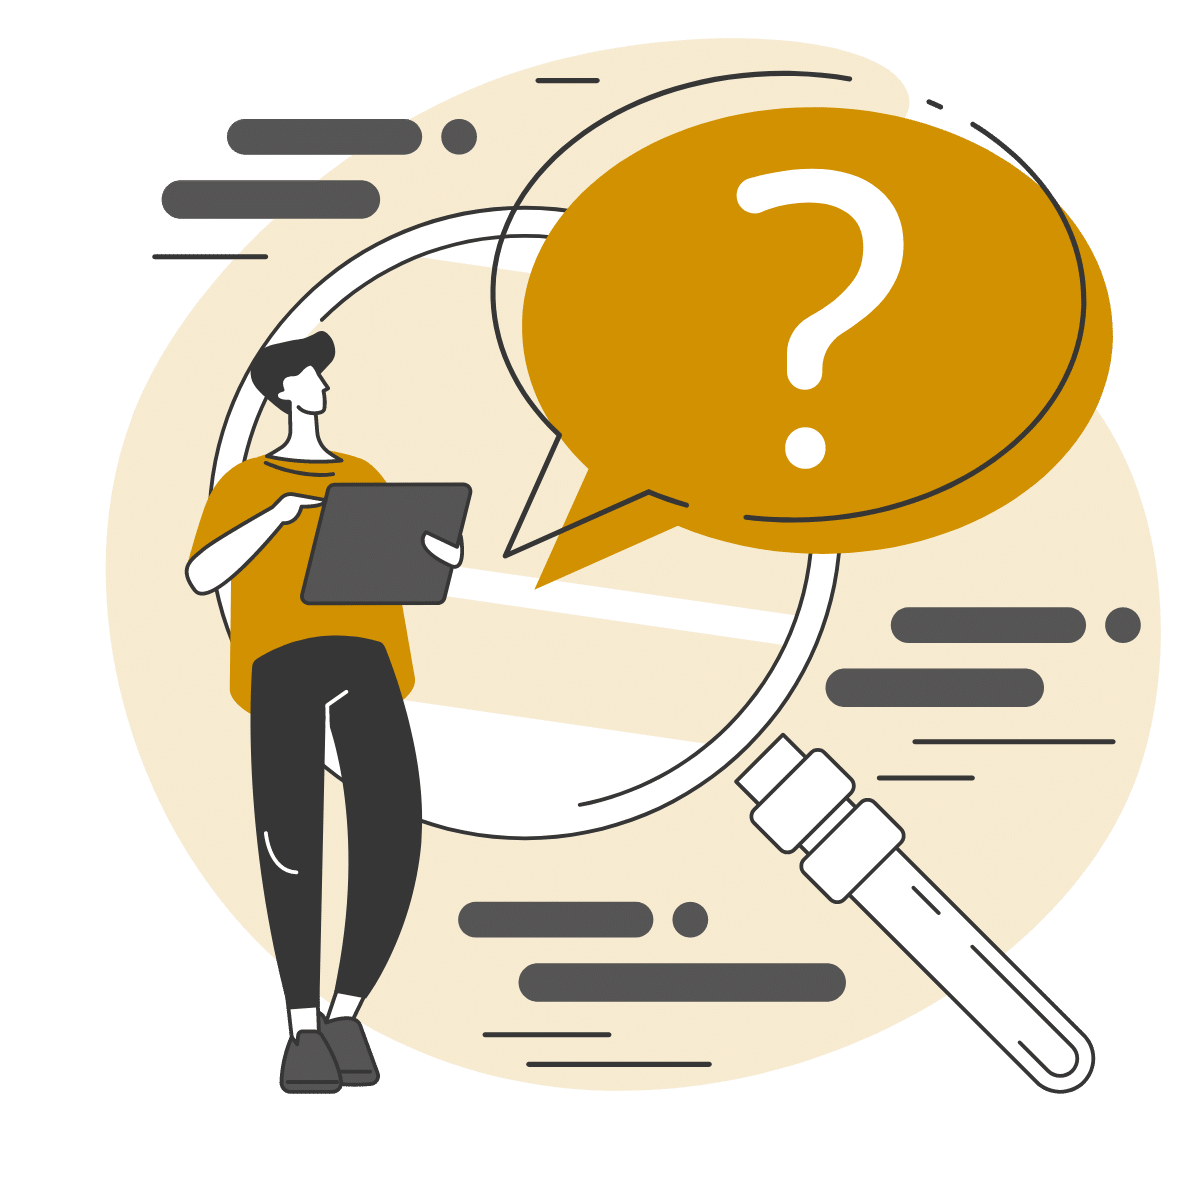 FAQ - Frequently Asked Questions